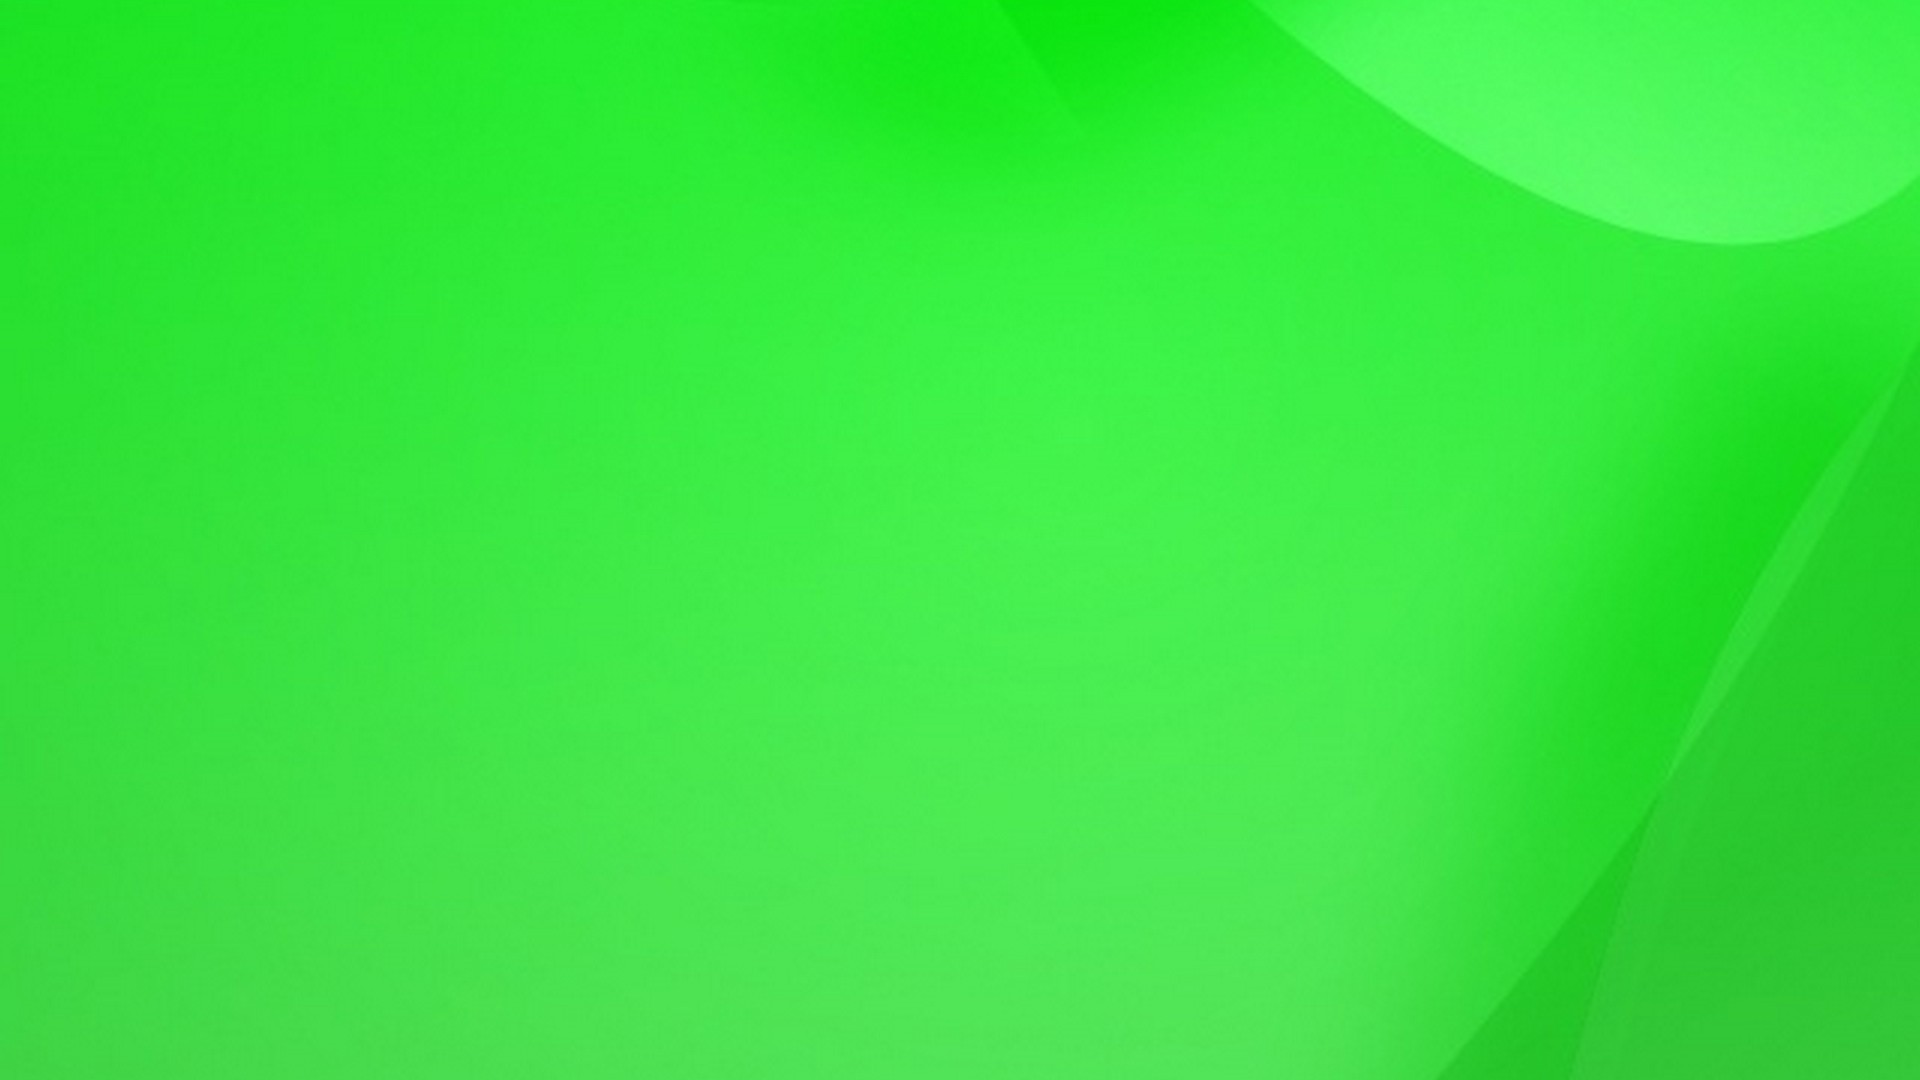 HD Wallpaper Lime Green With Resolution 1920X1080 pixel. You can make this wallpaper for your Desktop Computer Backgrounds, Mac Wallpapers, Android Lock screen or iPhone Screensavers